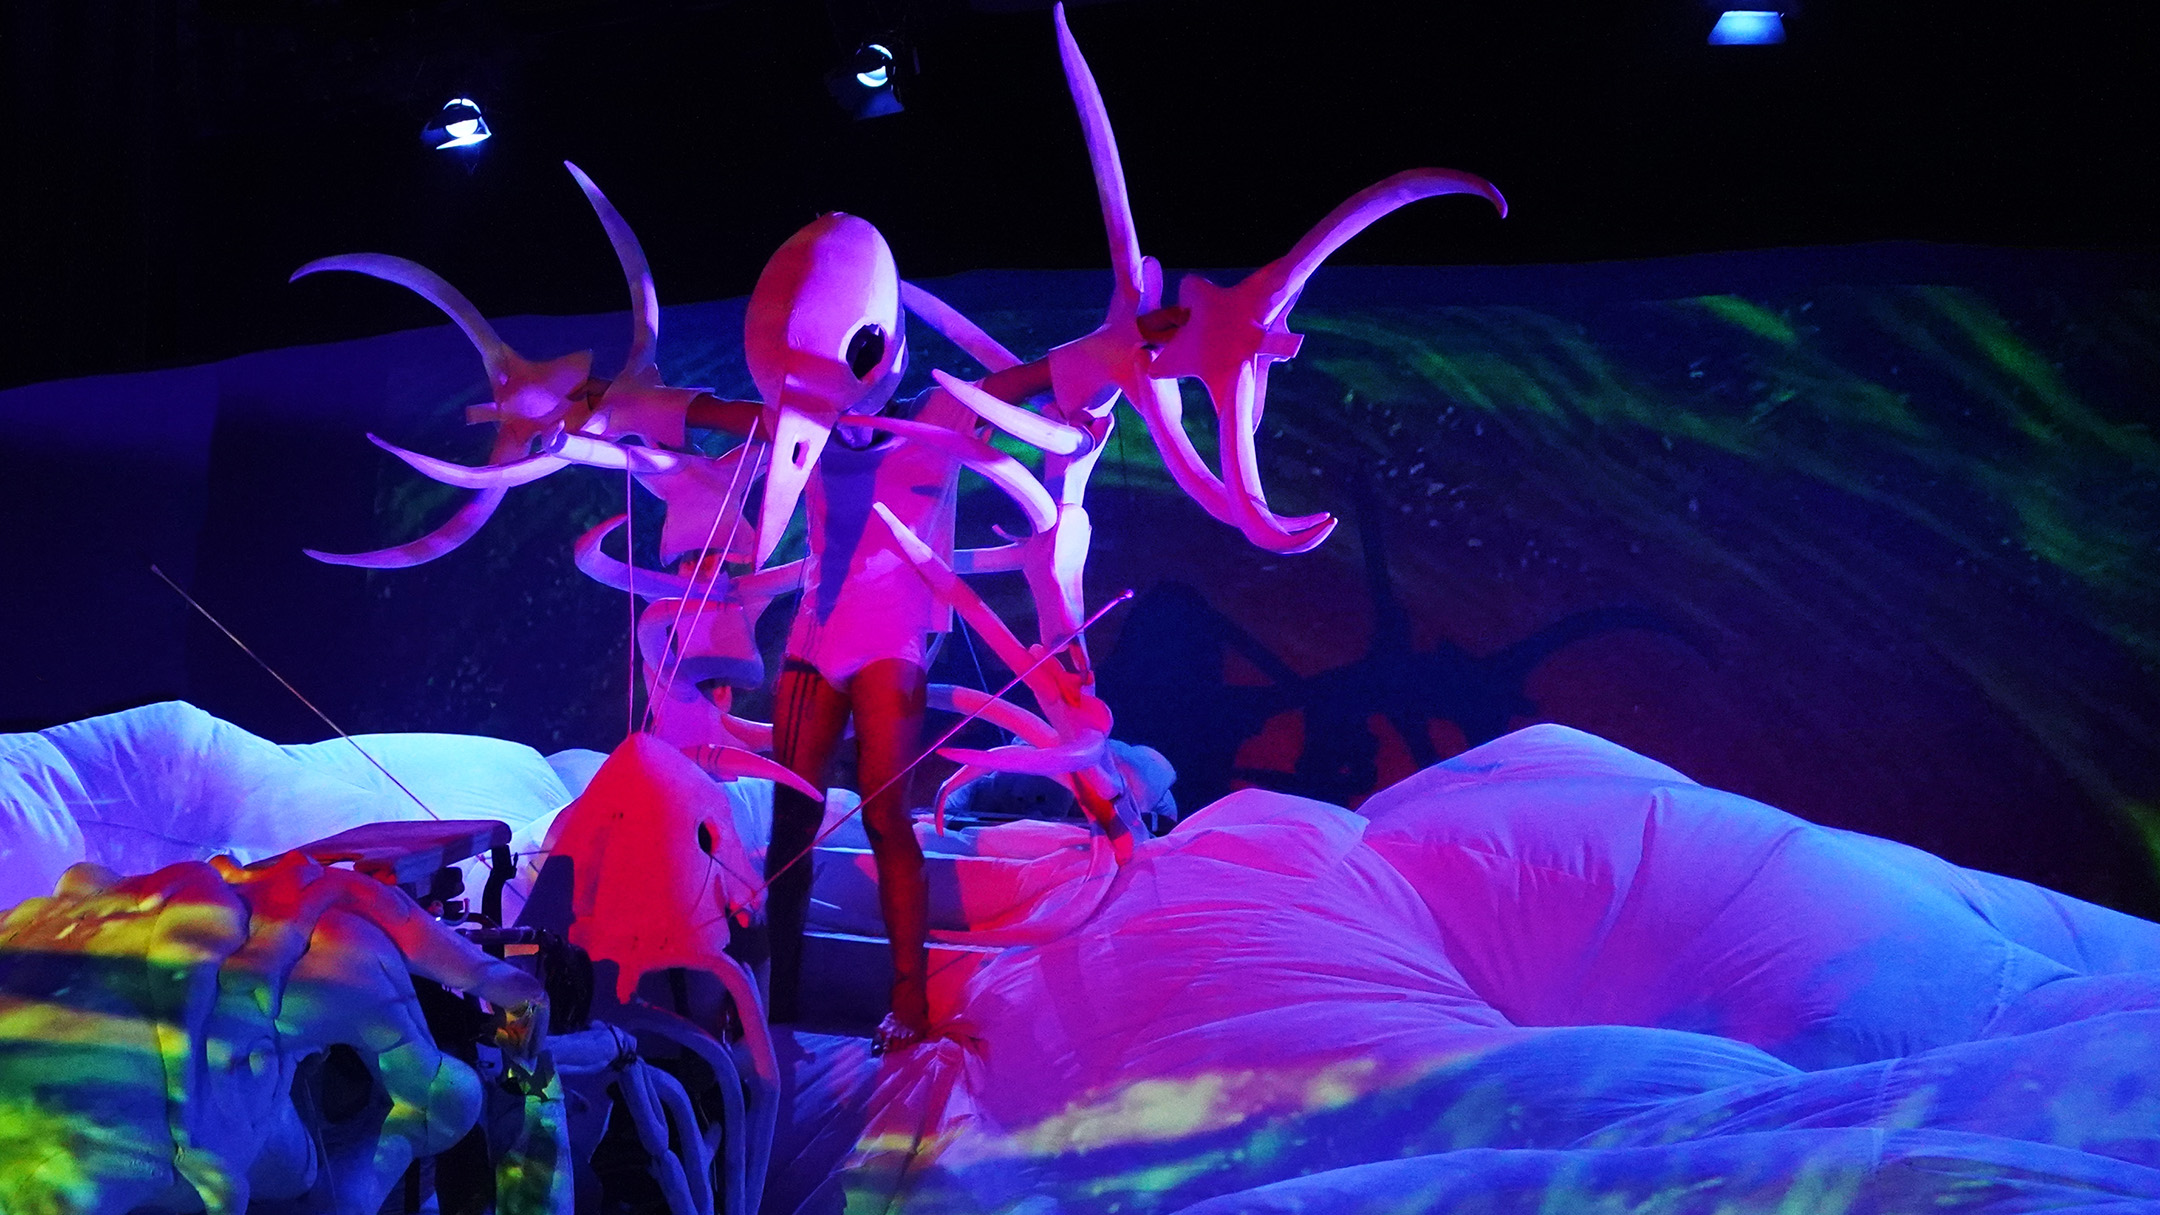 Snuff Puppets Swamp, a perosn covered in large white bones stands on top of a large inflatable mound covered in colourful projections